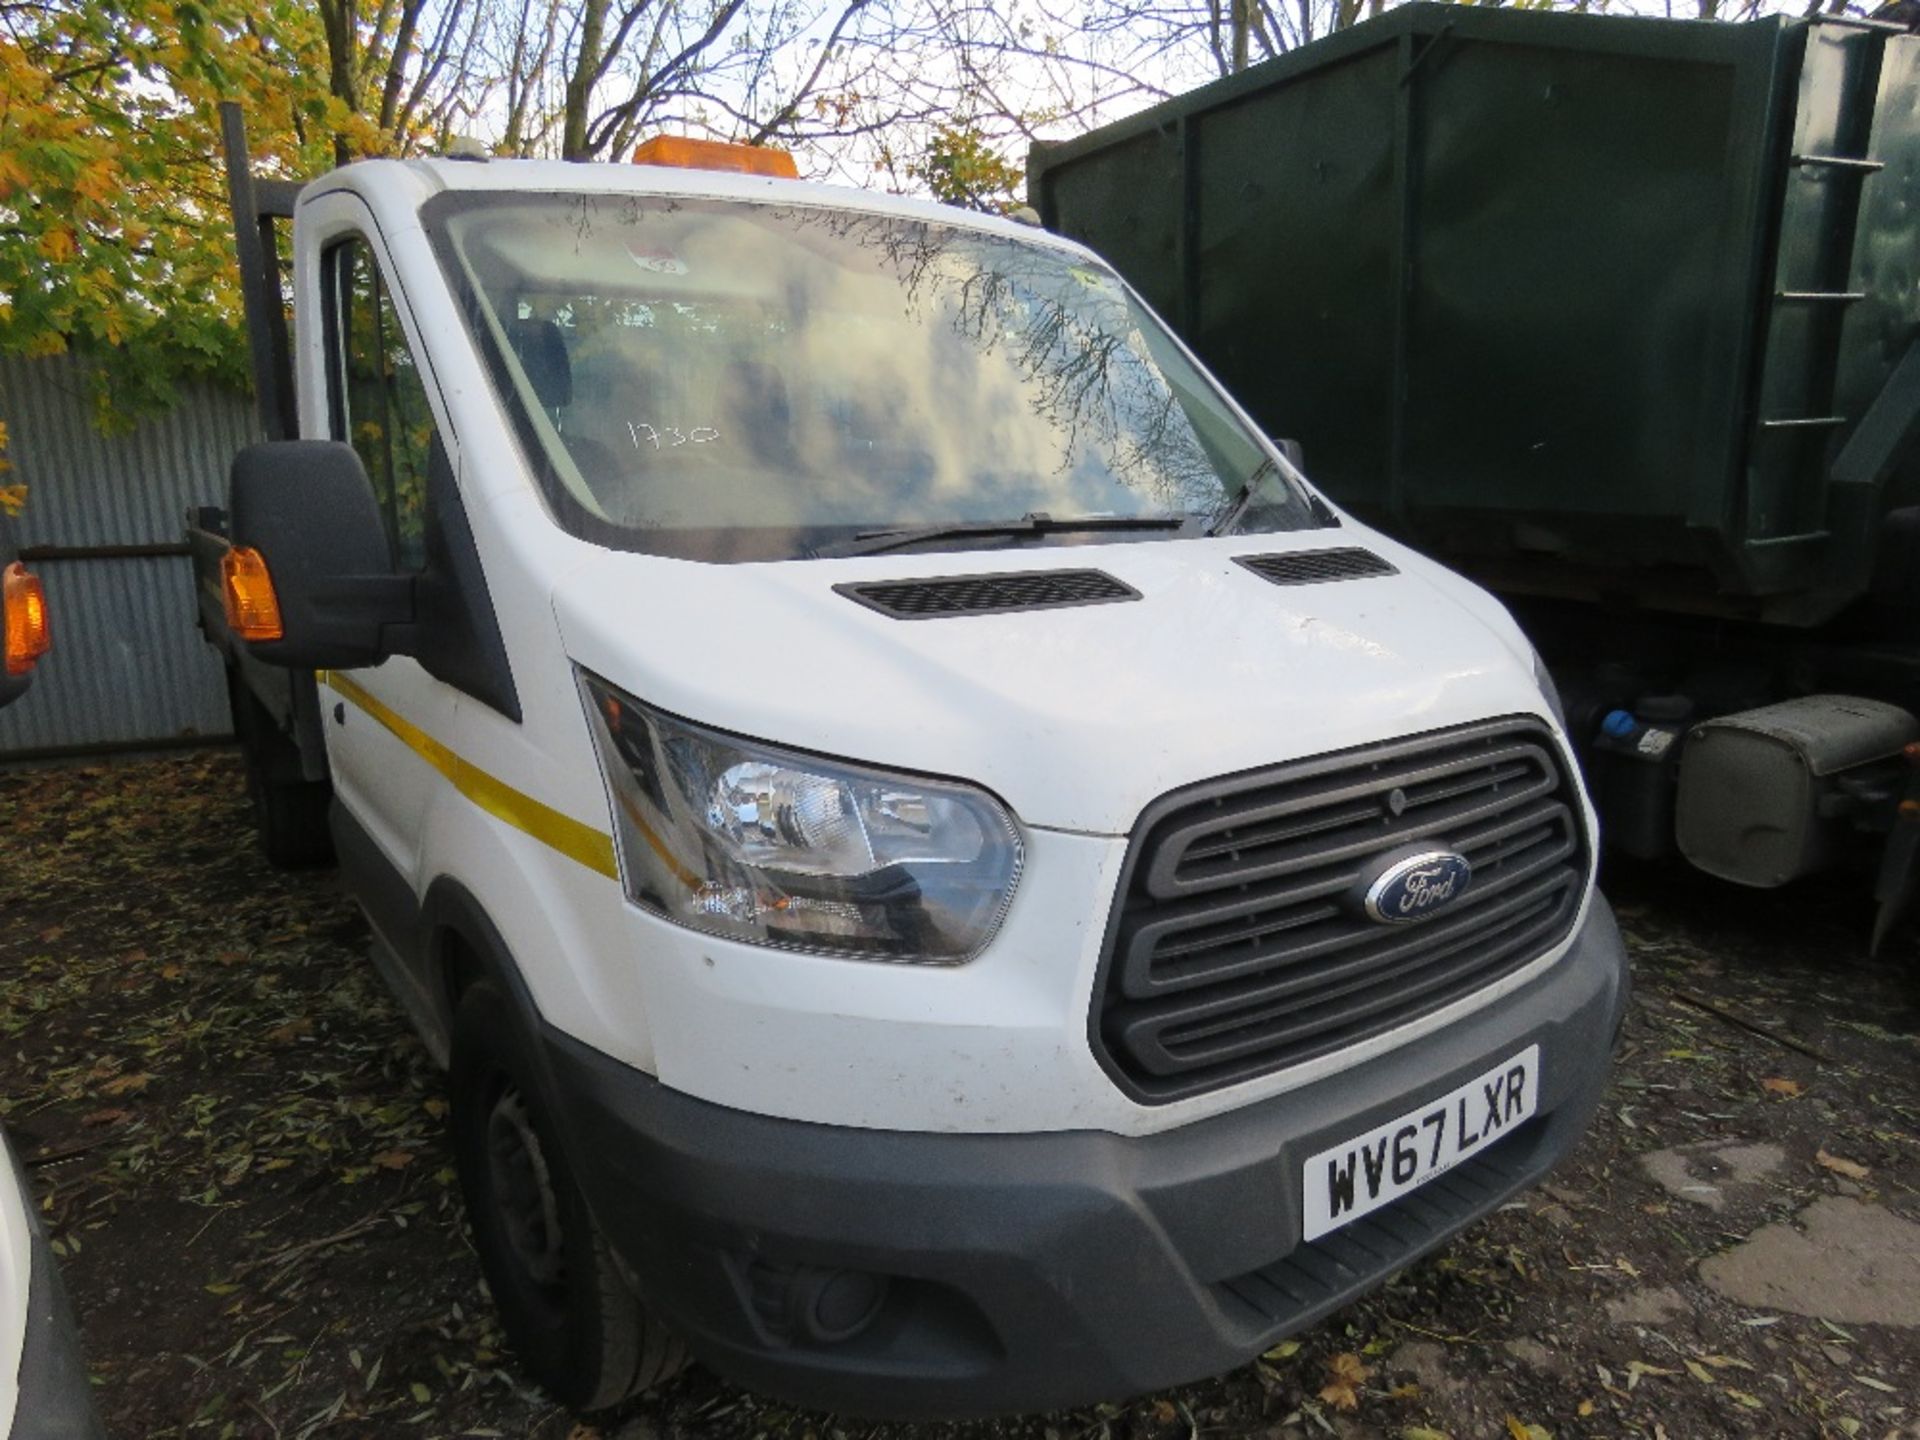 FORD TRANSIT SINGLE CAB 350 DROP SIDE TIPPER TRUCK REG:WV67 LXR. WITH V5 FIRST REGISTERED 27/9/17 (E